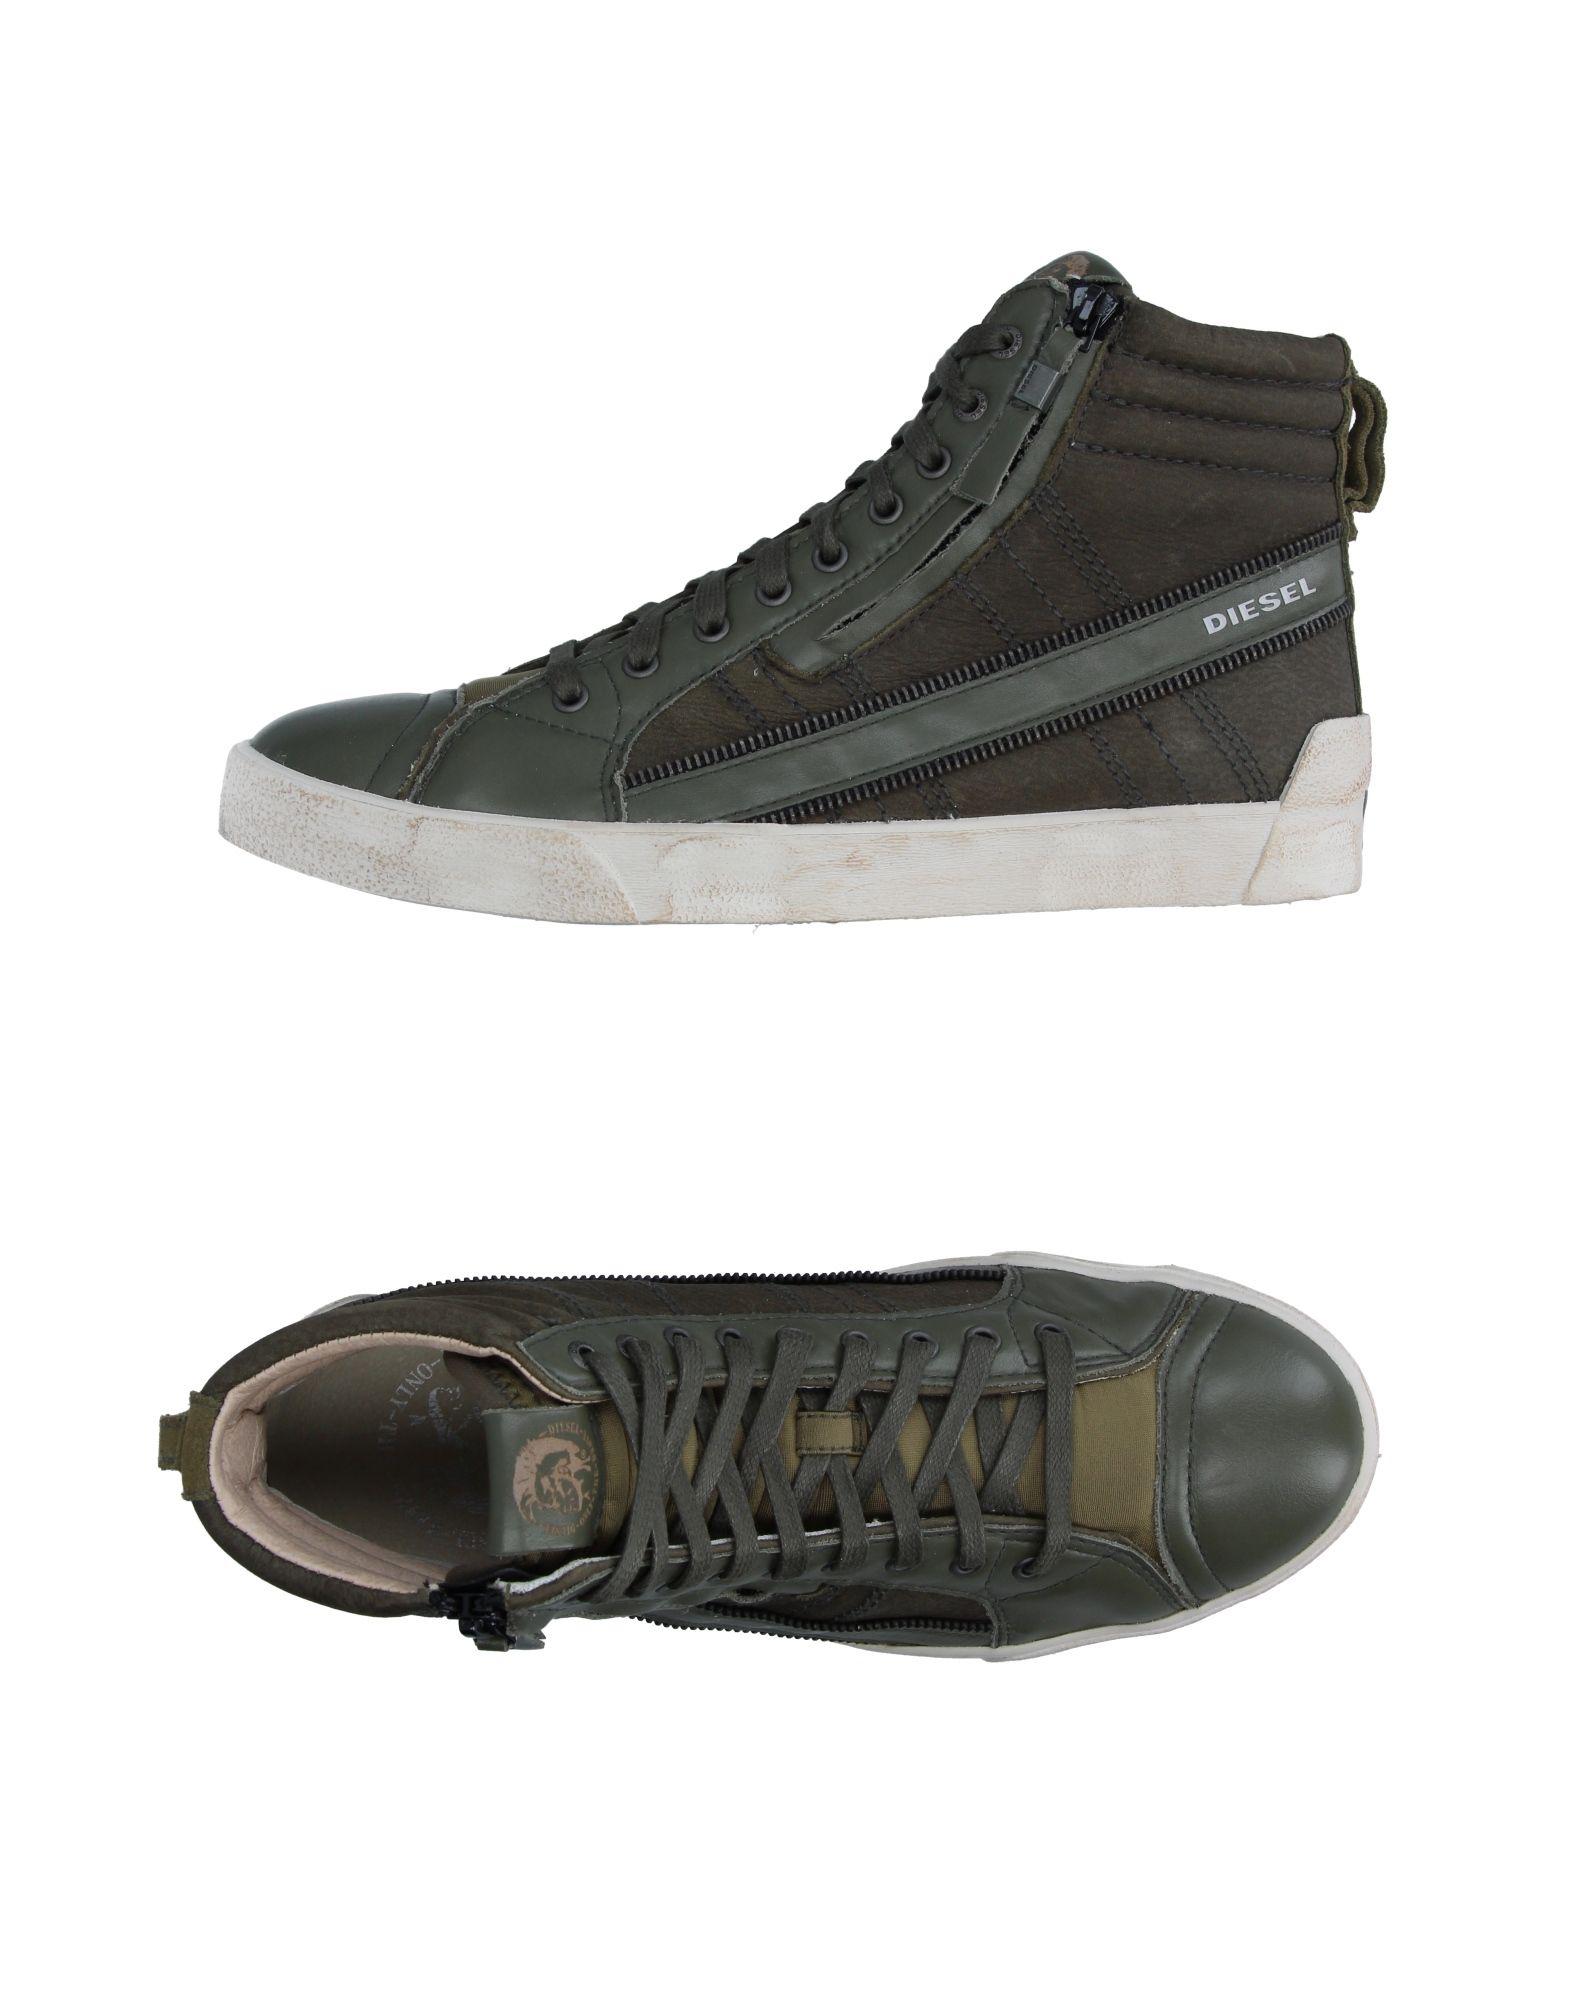 DIESEL Leather High-tops & Sneakers in Military Green (Green) for Men ...